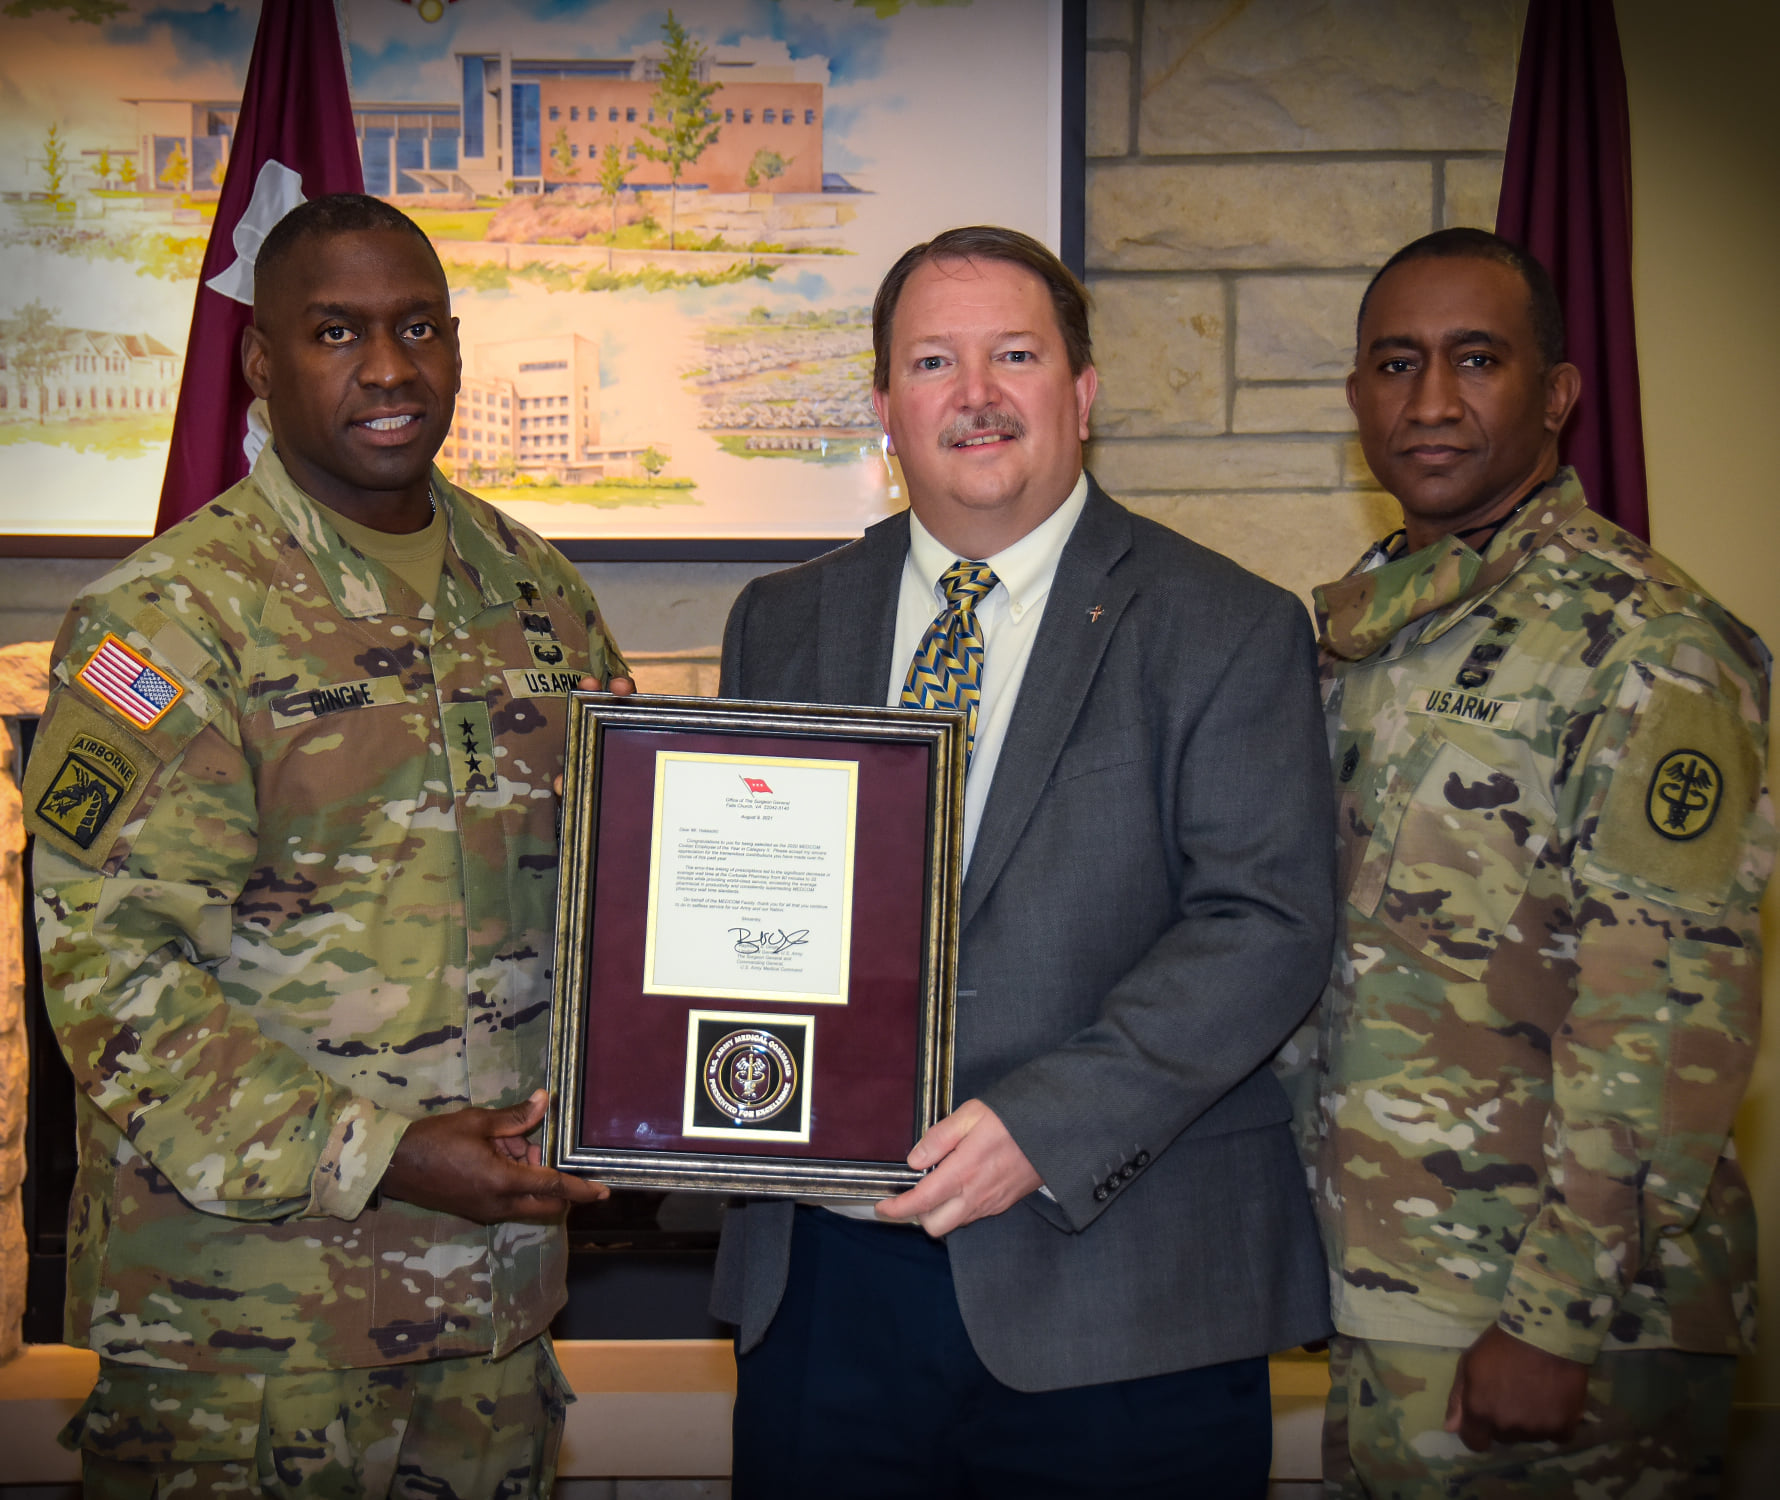 David Hatesohl (center), is awarded the MEDCOM Civilian of the Year Award by 45th Surgeon General of the U.S. Army and Commanding General for the U.S. Army Medical Command Lt. Gen. Raymond Dingle (left) and Sgt. Maj. Diamond Hough (right).